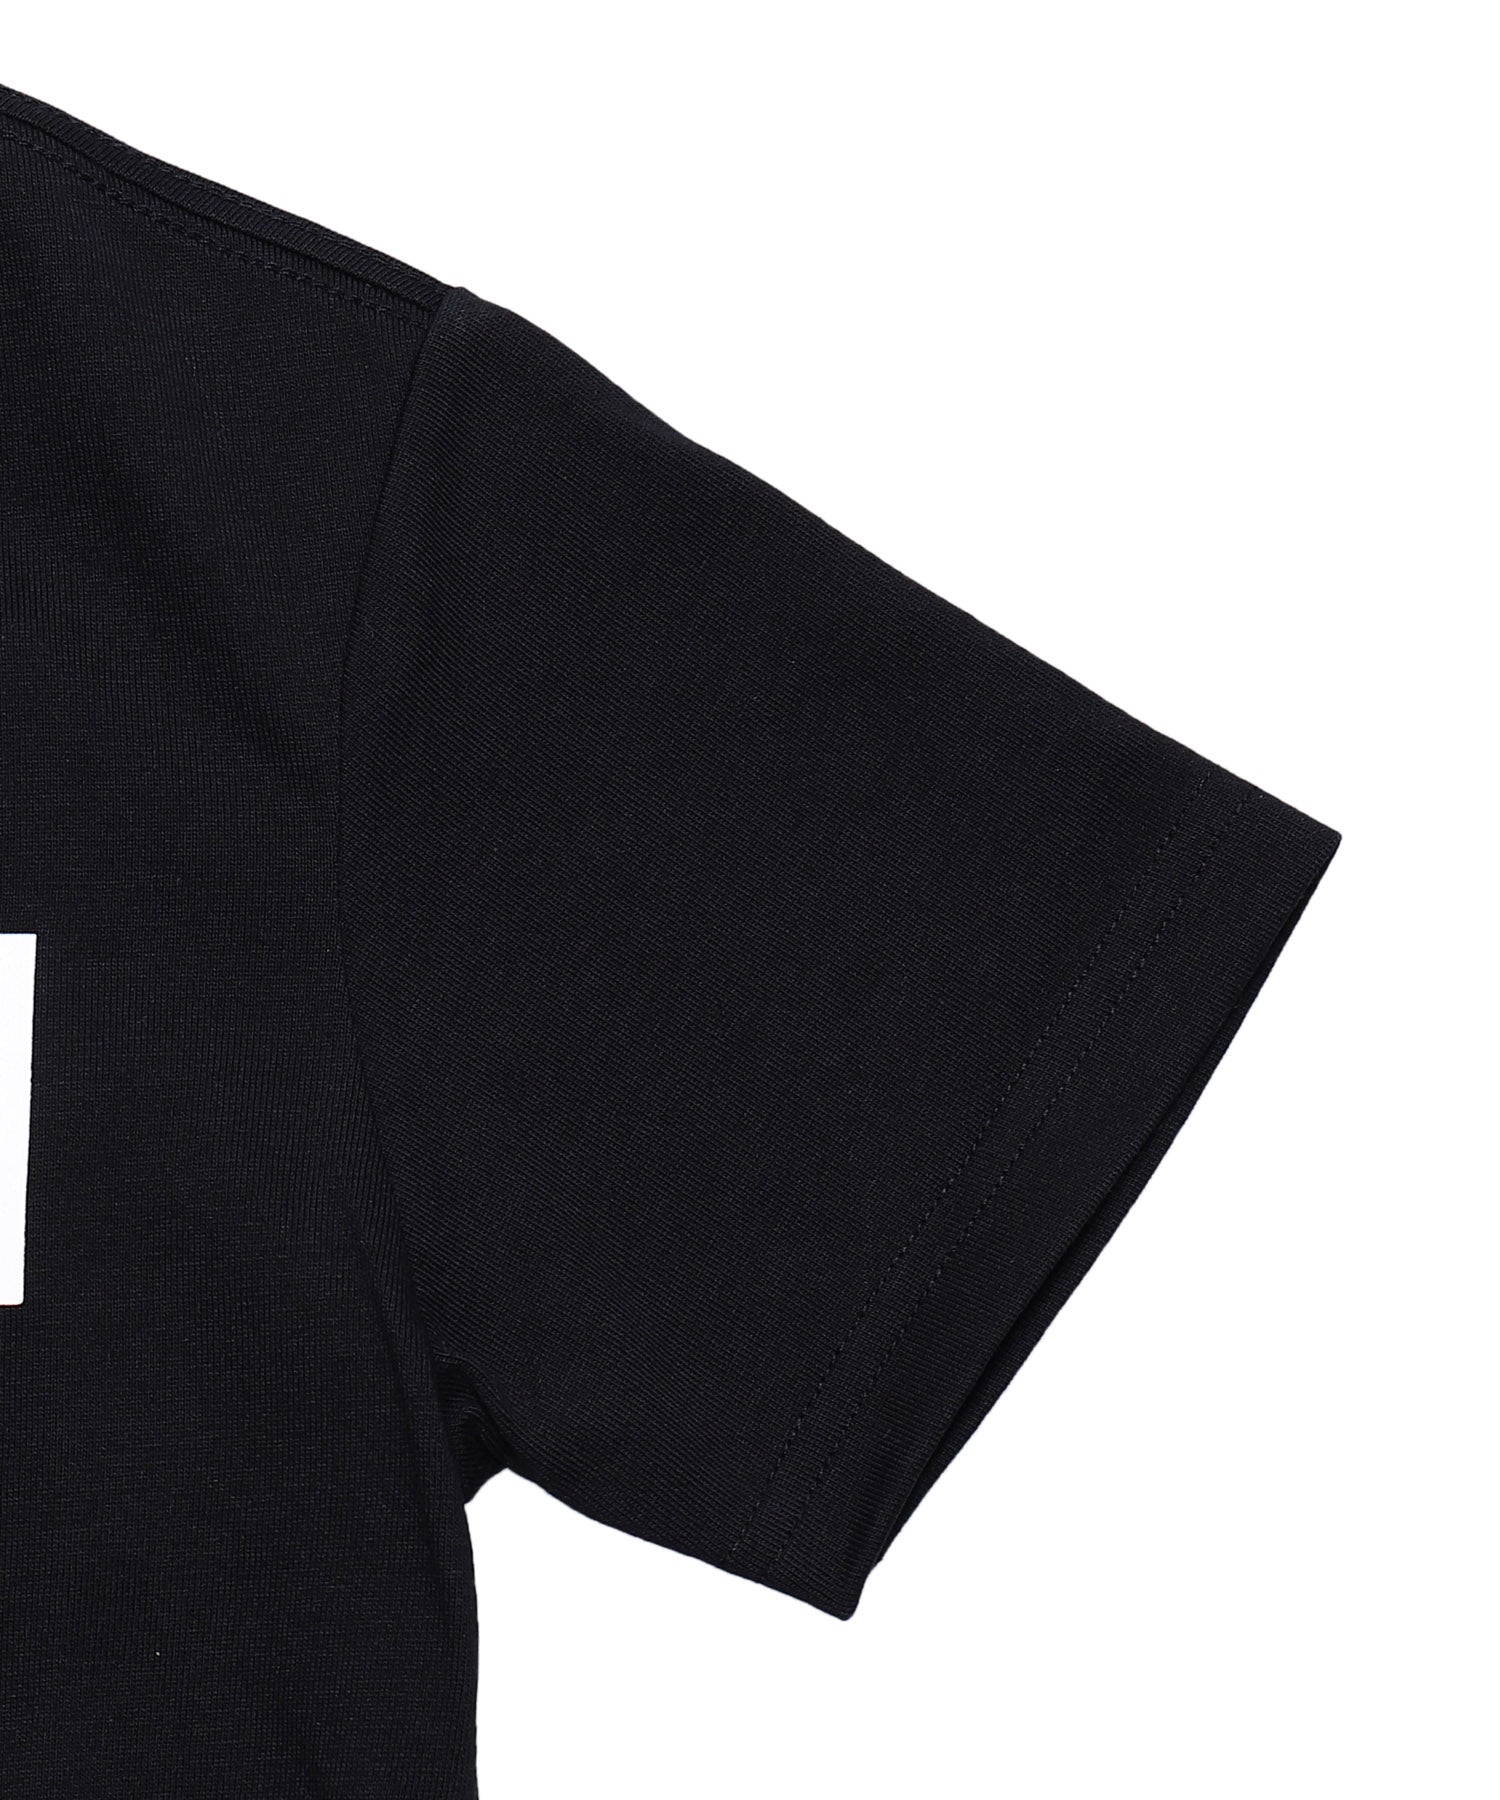 Kids S/S Small Square Logo Tee